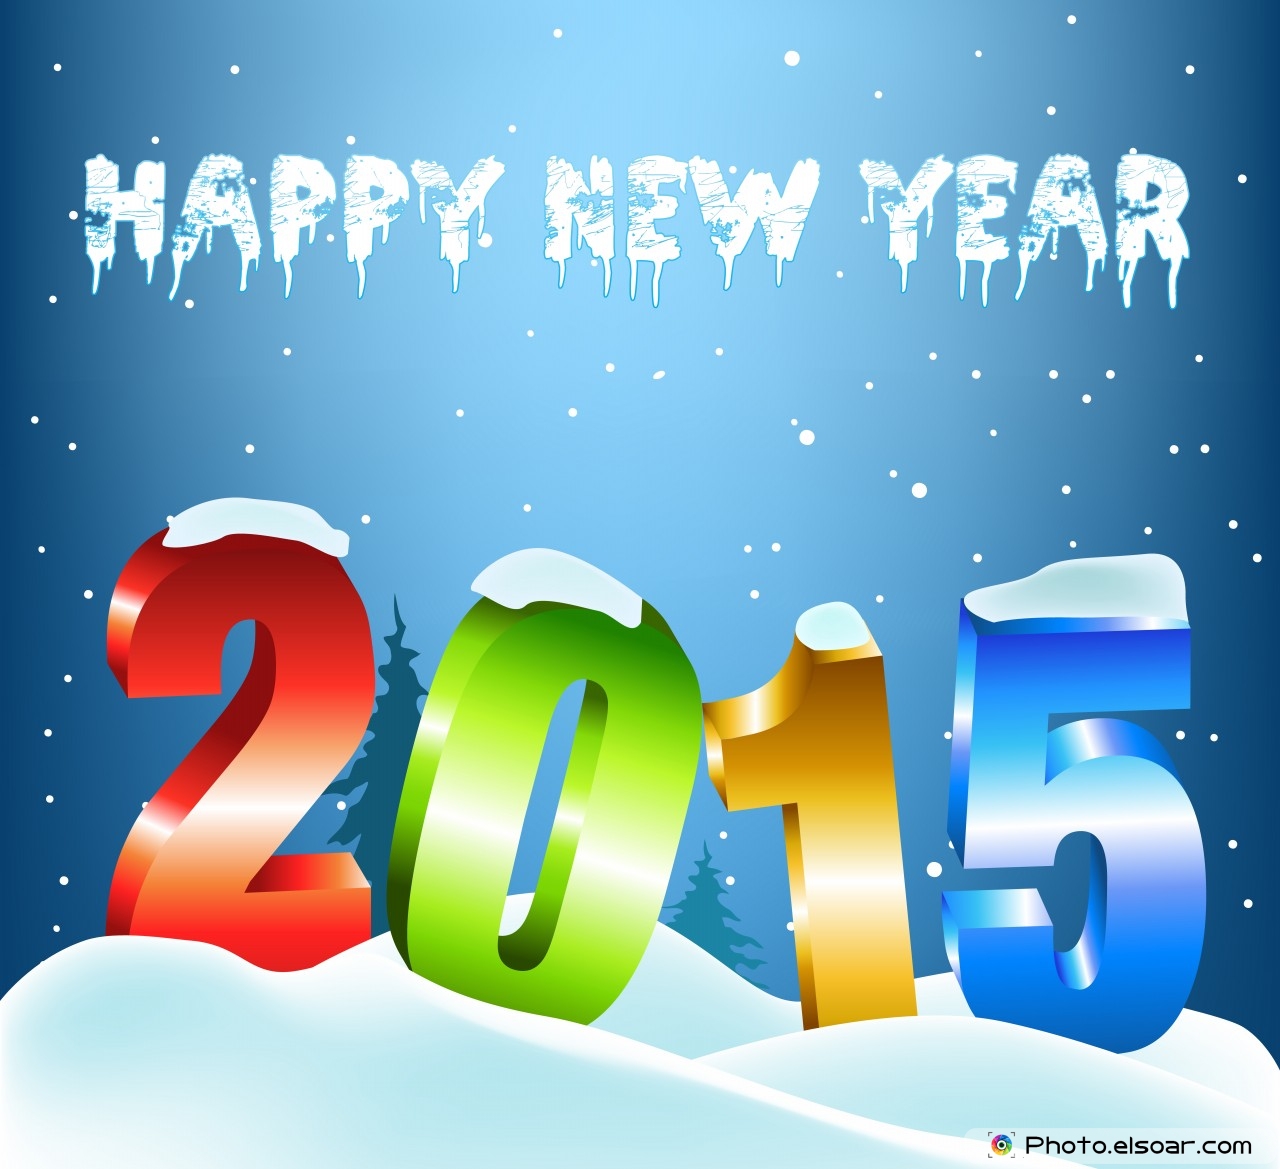 Happy New Year 2015 With Stylish Colorful Text And Snow